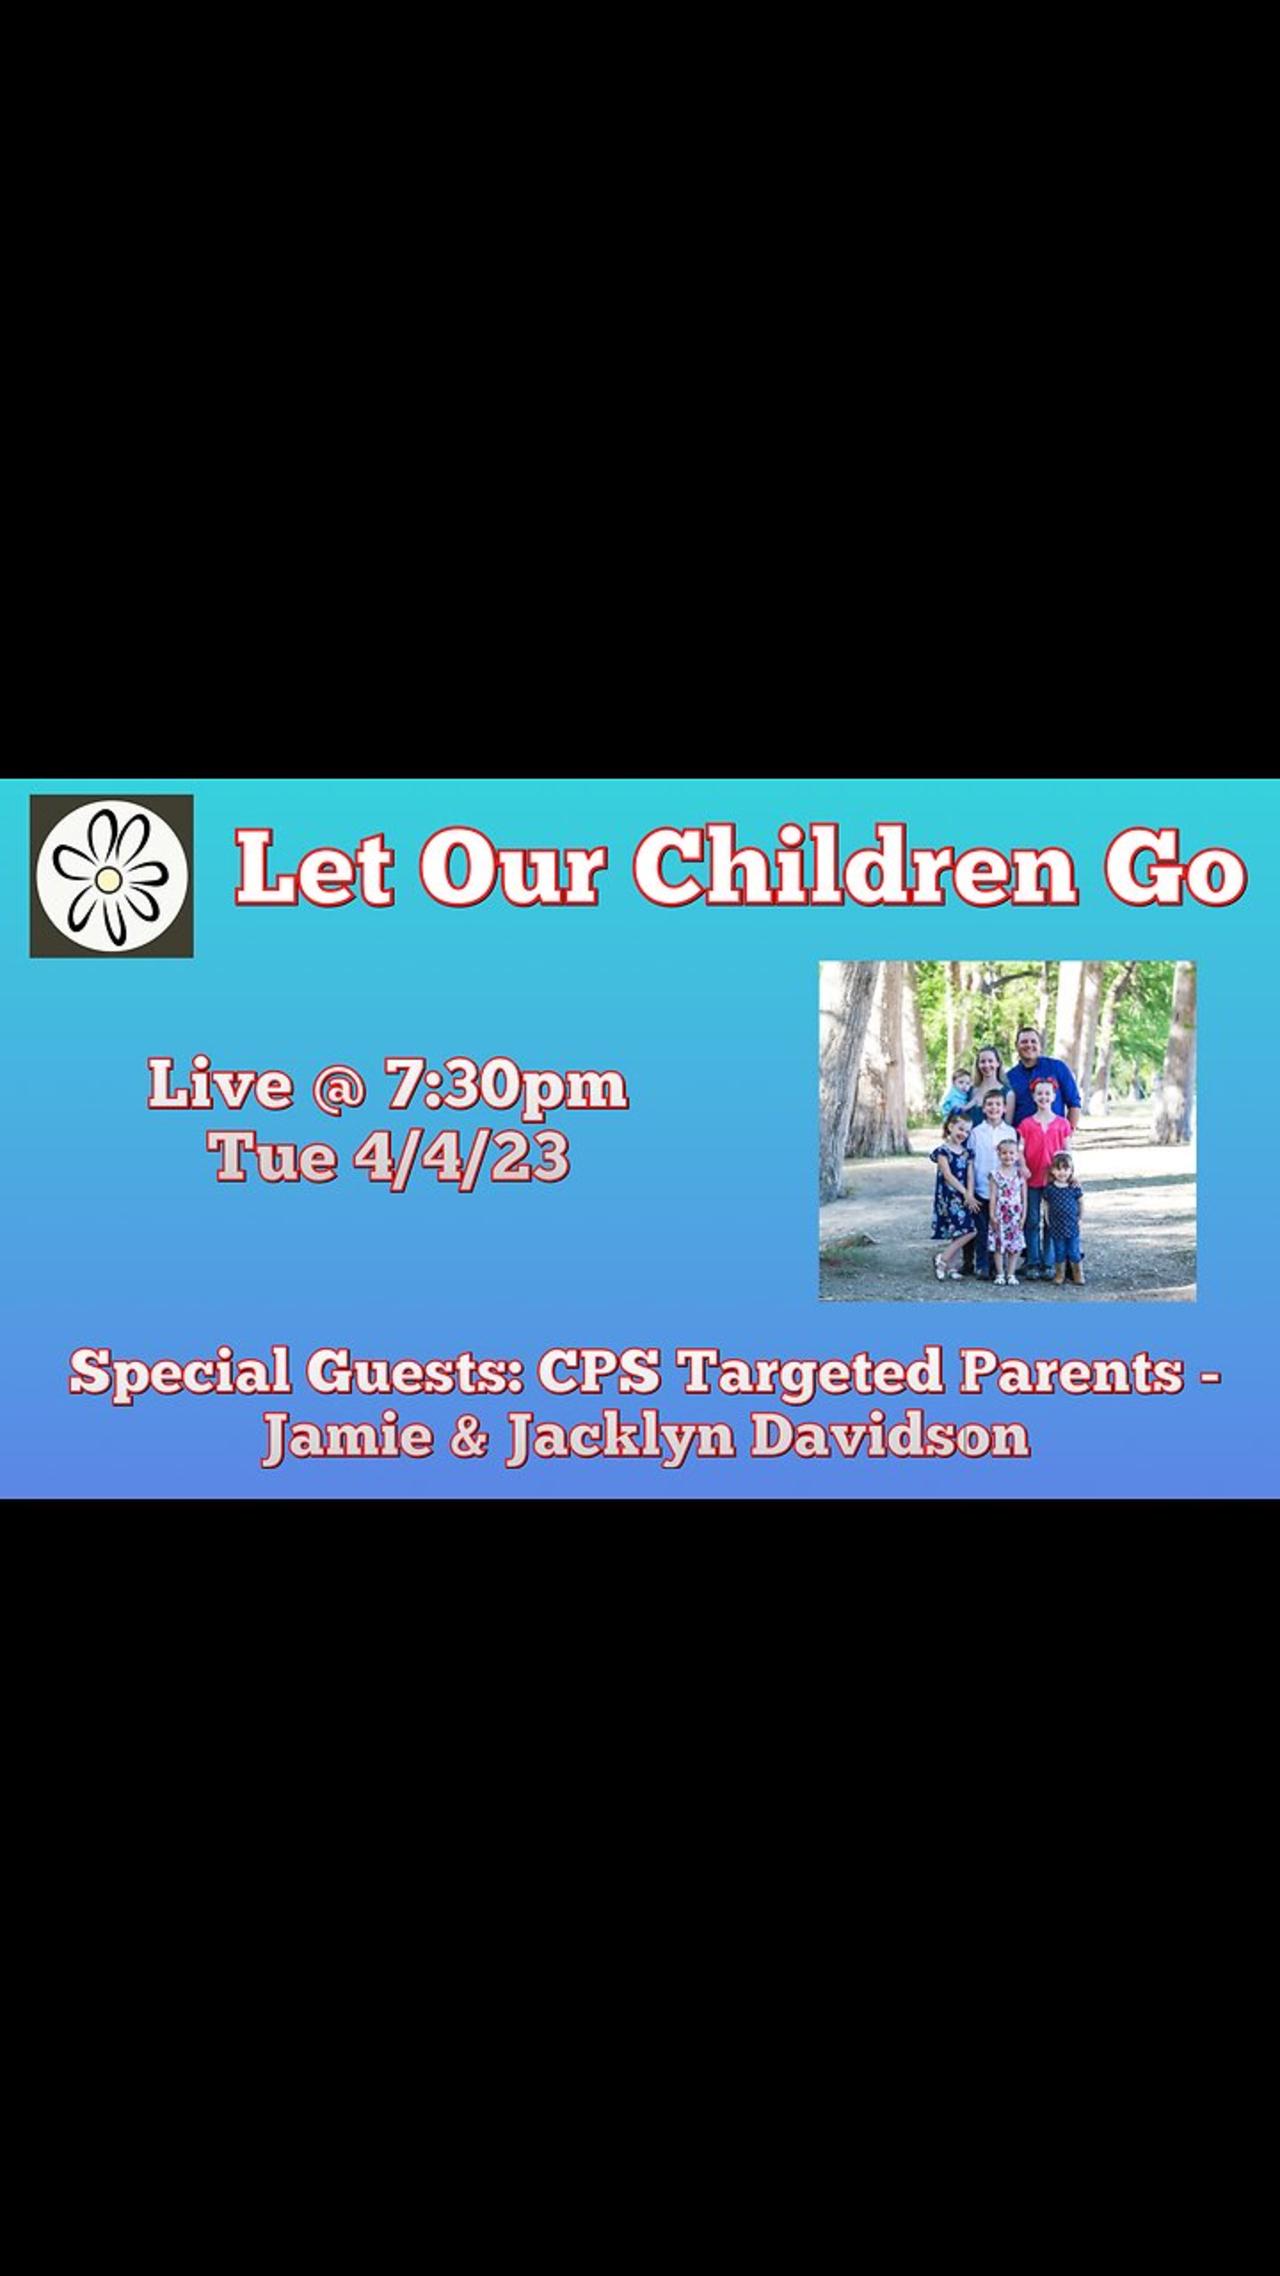 Let Our Children Go w/ Special Guests: CPS Targeted Parents - Jamie & Jacklyn Davidson